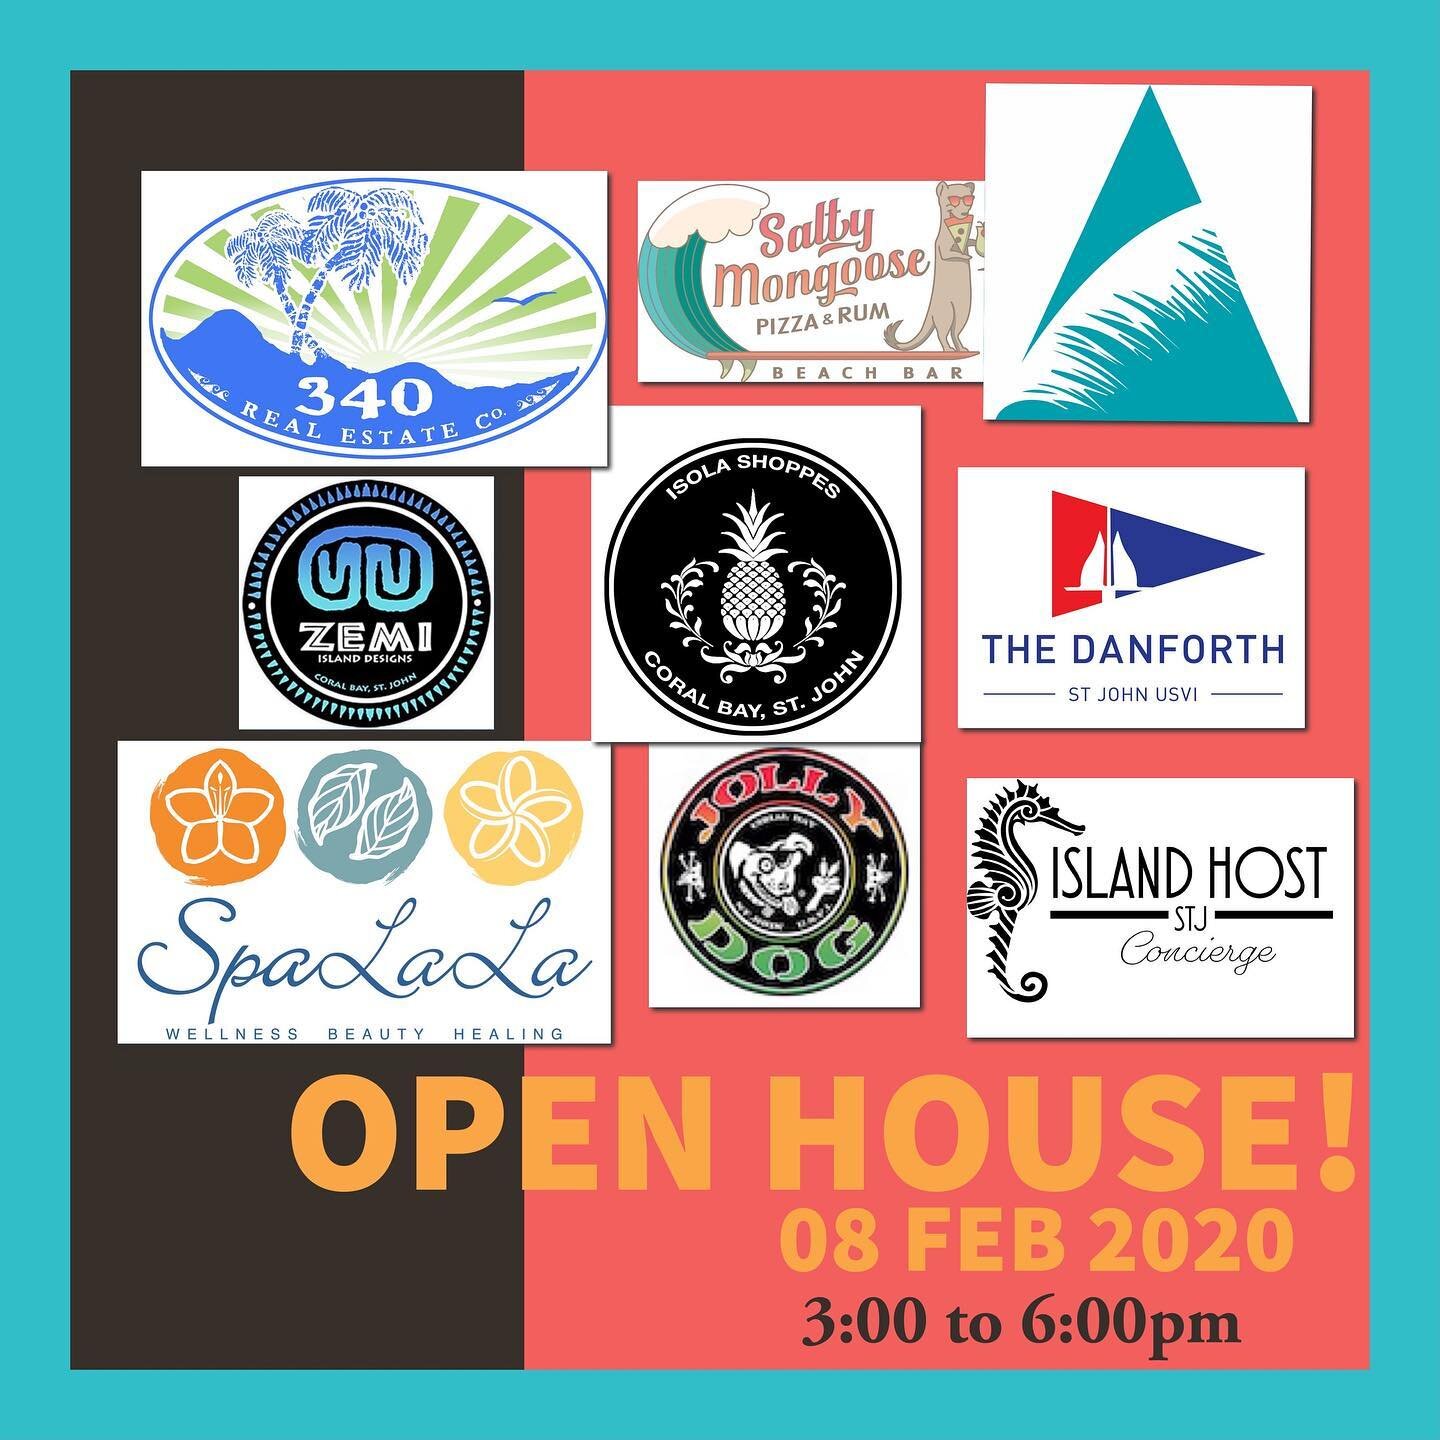 Please join us for our first OPEN HOUSE this coming Sat Feb 8, 3-6pm. Live Steel Pan music, bubbly and finger foods will be served! Proceeds from the raffle will benefit the Love City Pan Dragons! Raffle tickets are available for purchase.... and som